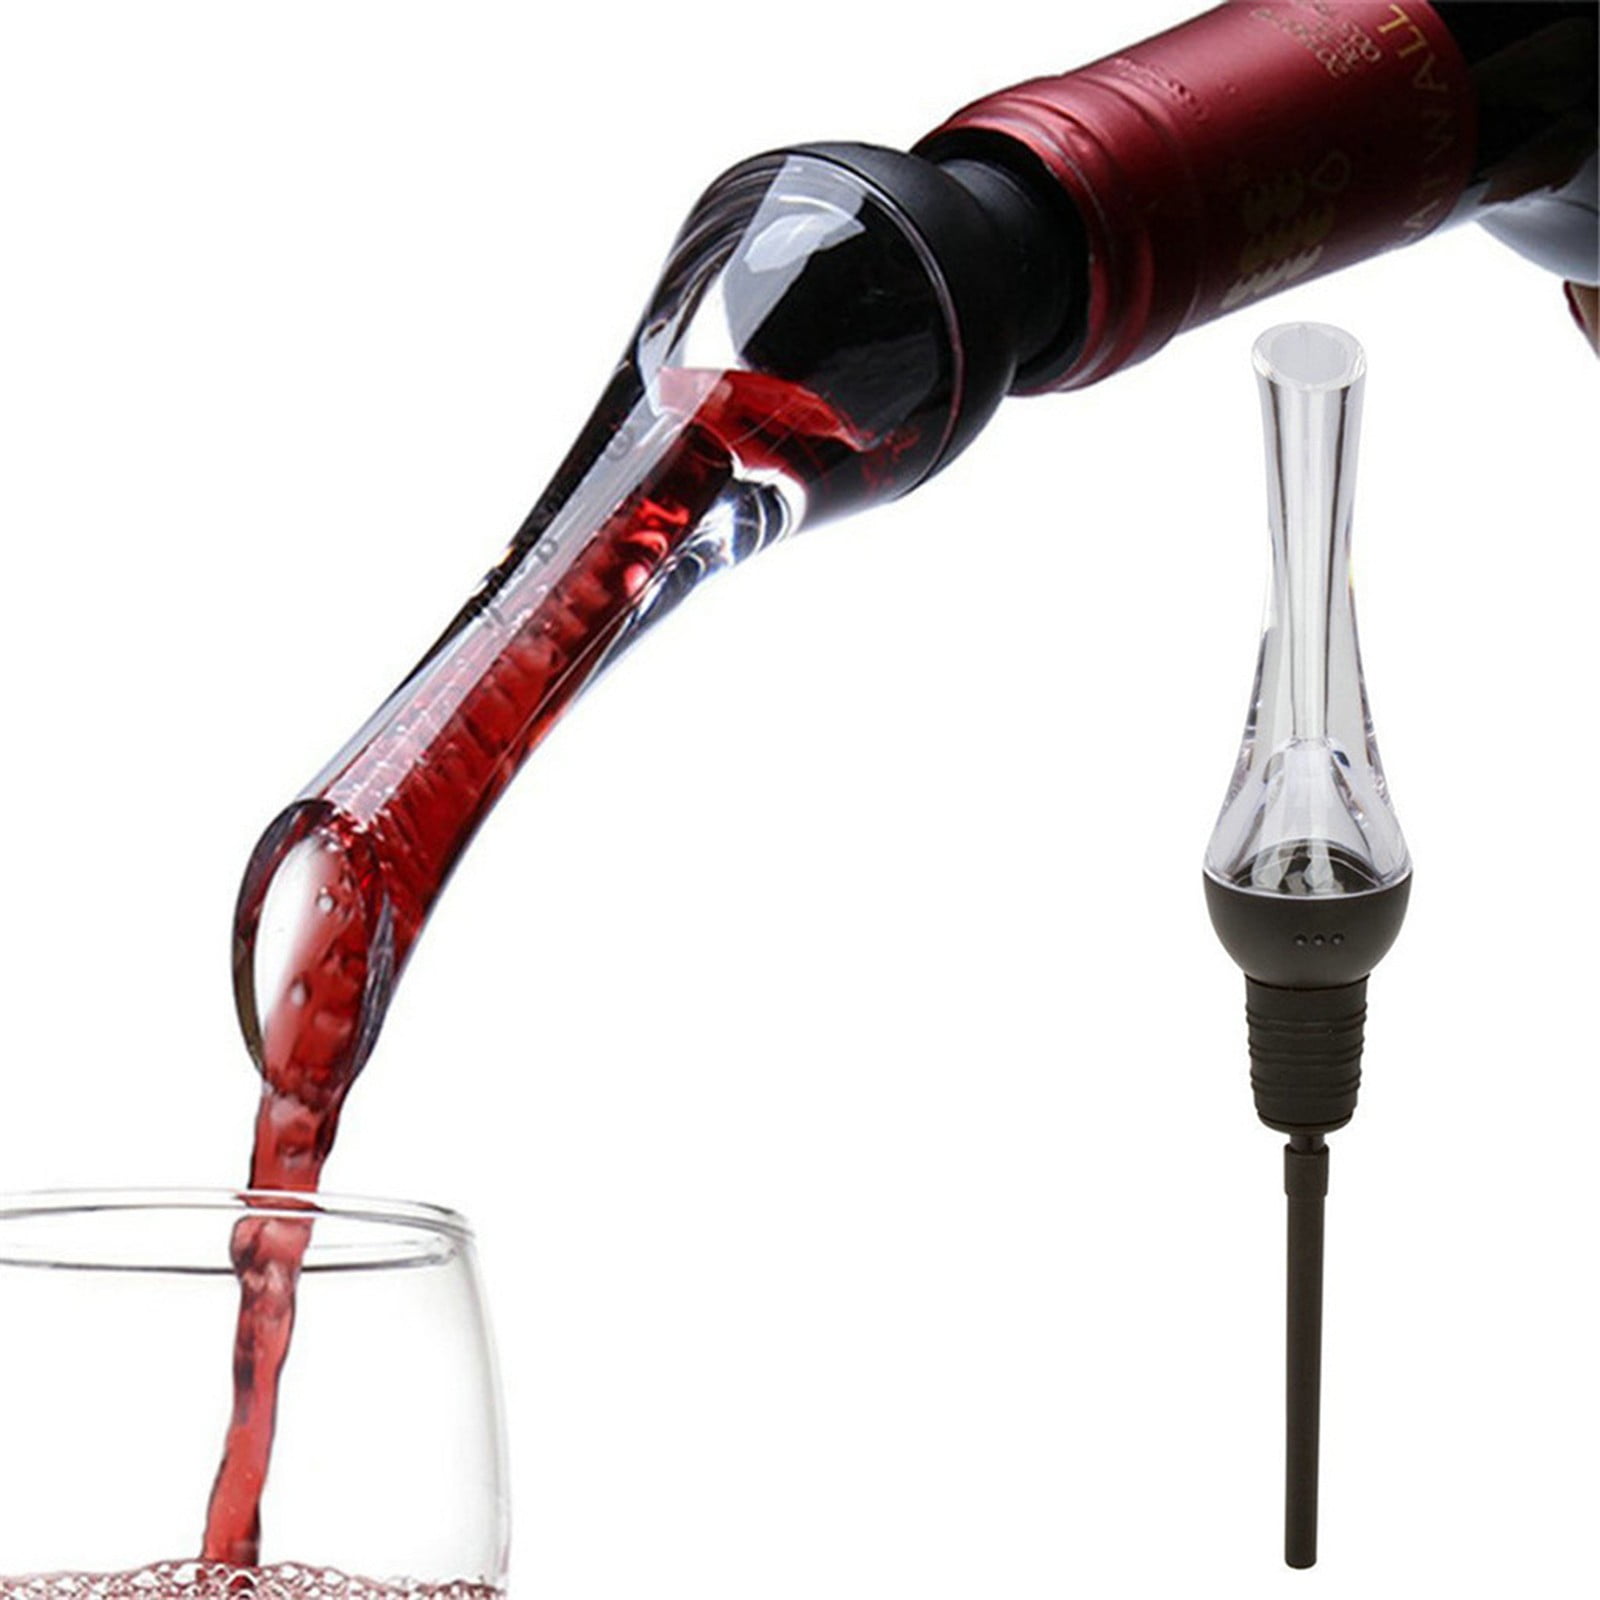 Sturdy Wine Pourer Aerating Pourer Decanter Wine Spout with rubber cap 